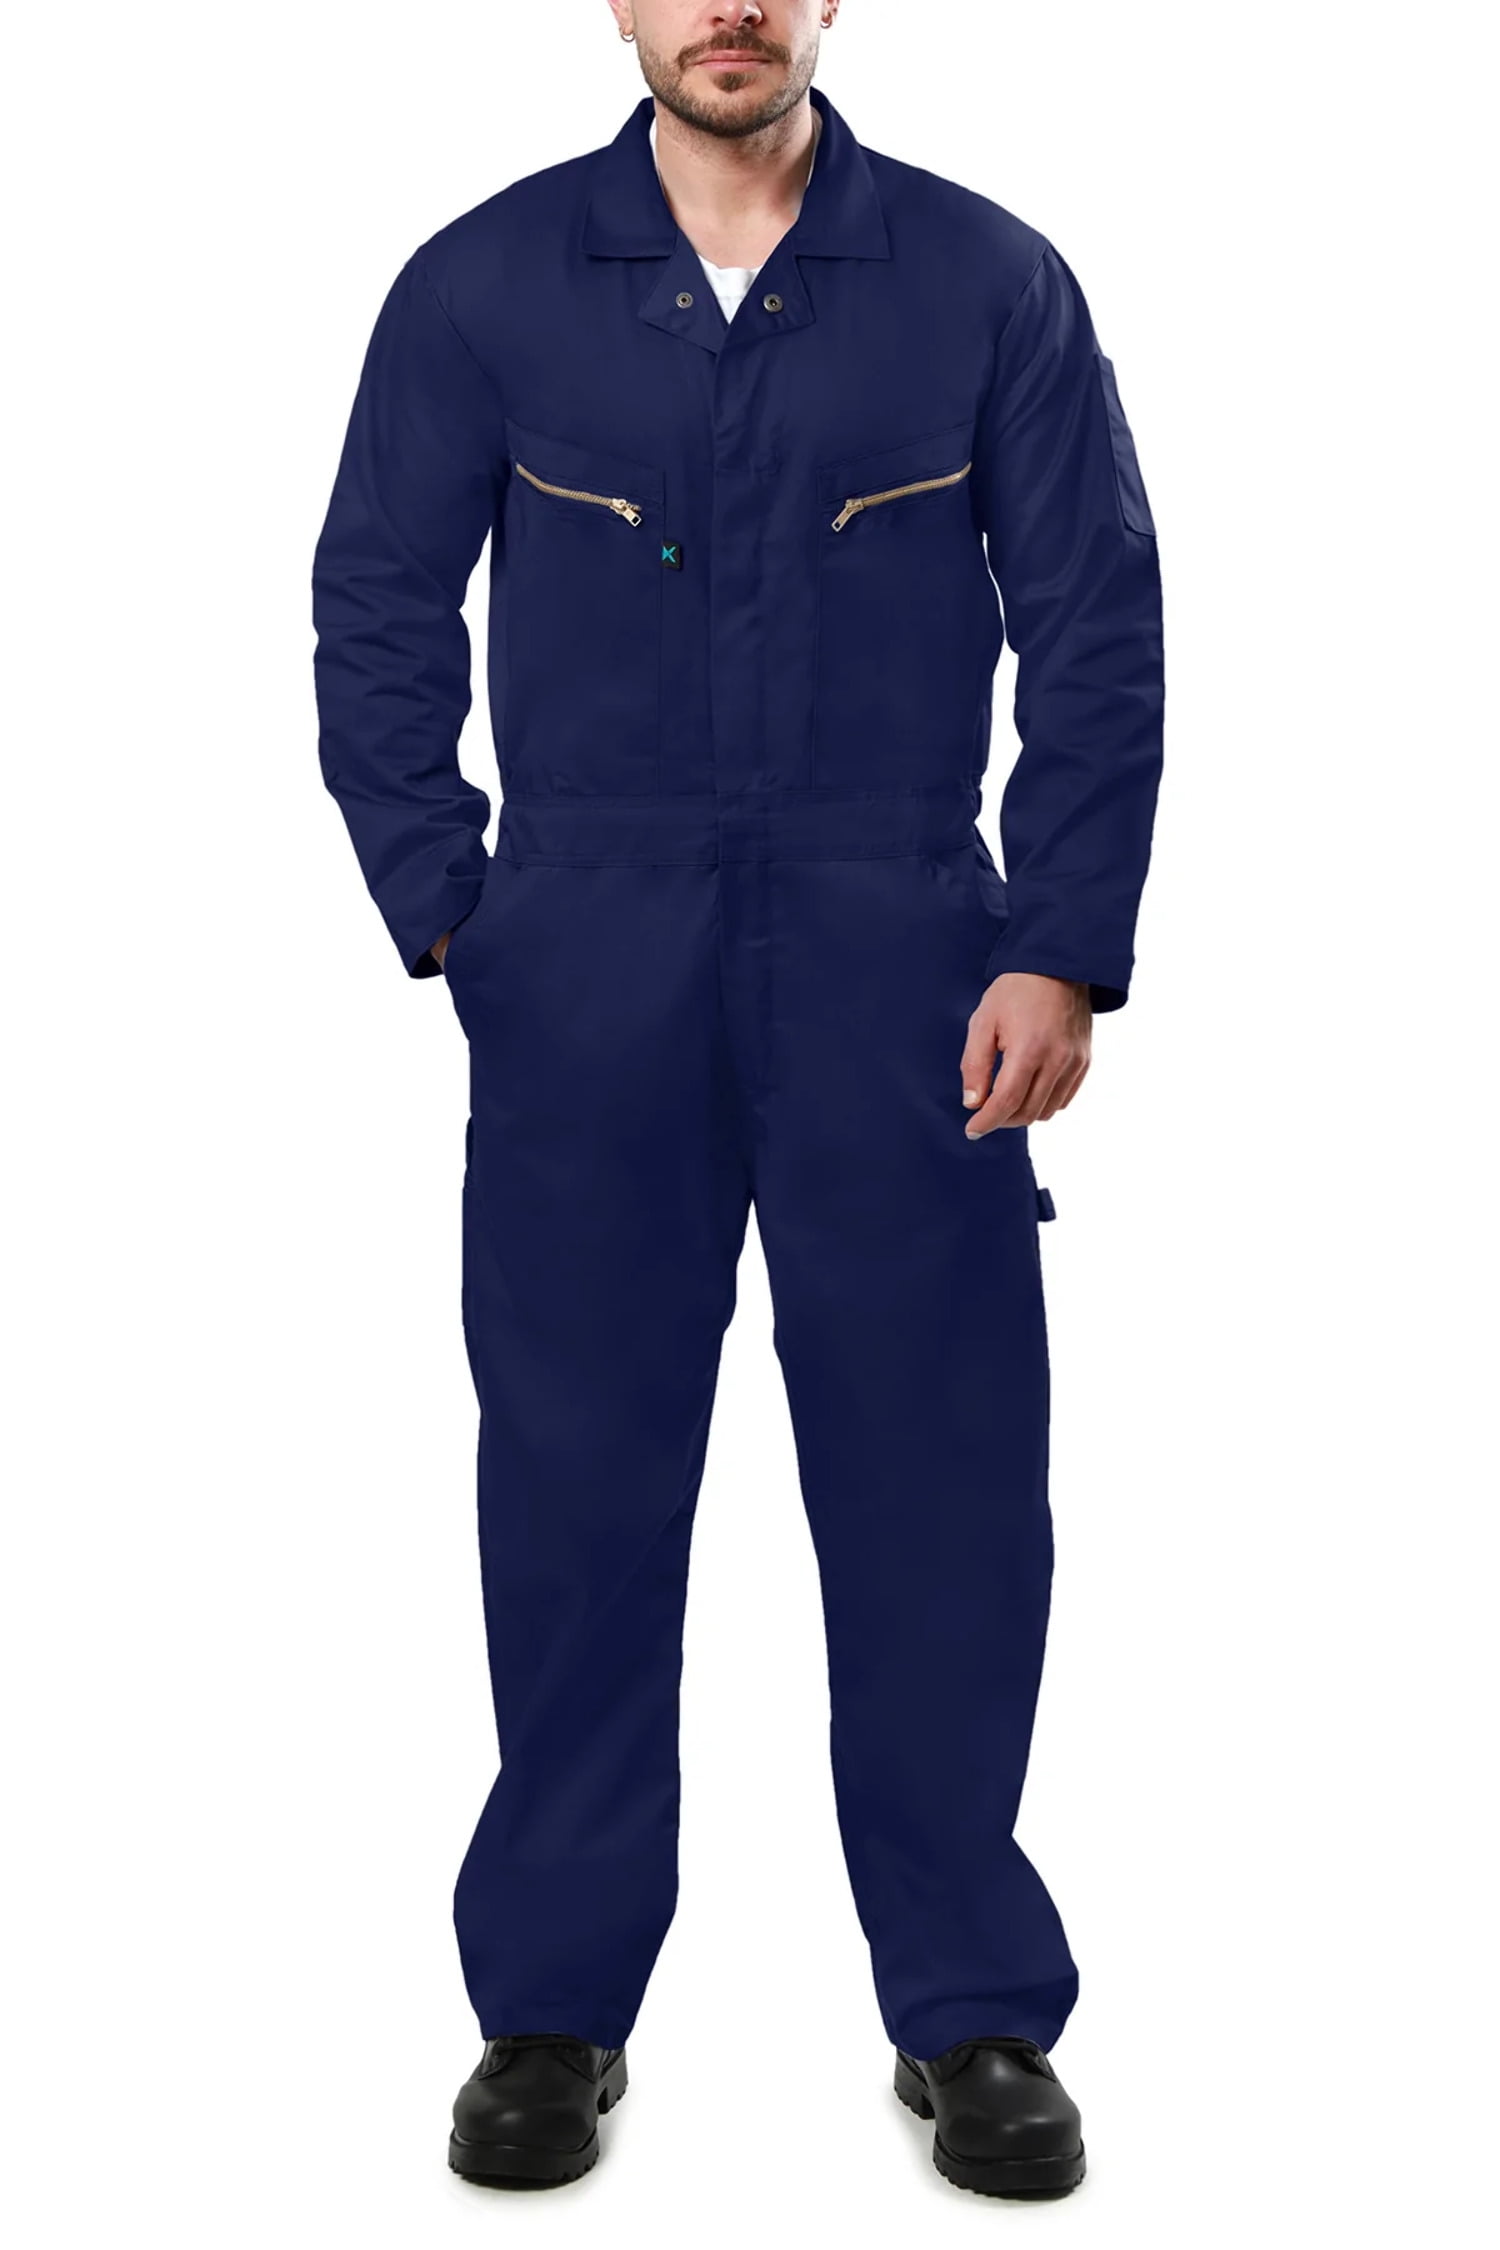 Kolossus Pro-Utility Cotton Blend Long Sleeve Coverall with Zip-Front ...